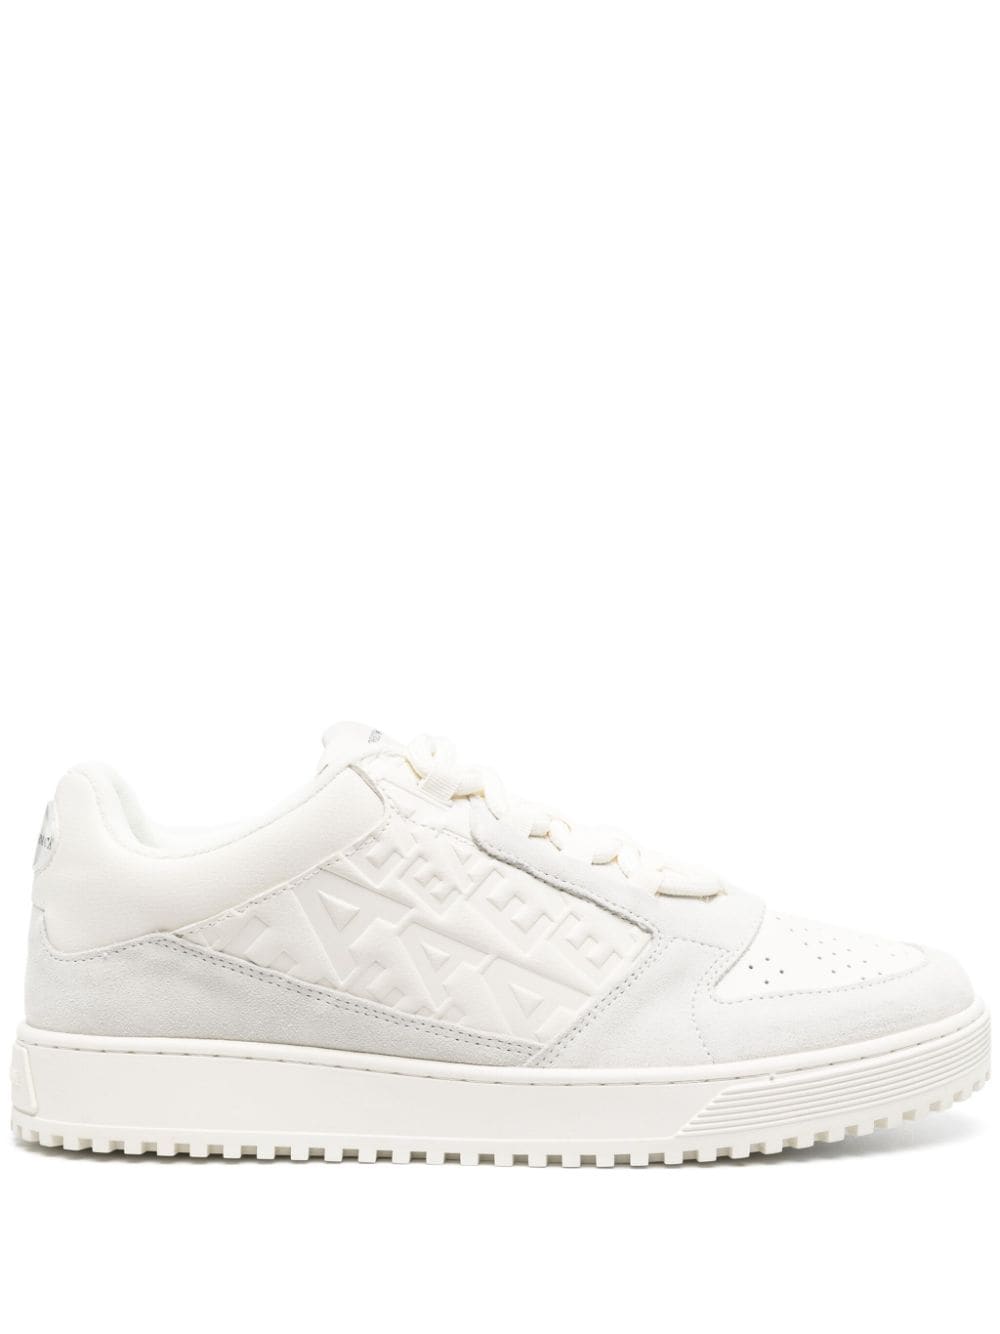 Emporio Armani Official Store Leather And Suede Trainers With Ea Logo In White